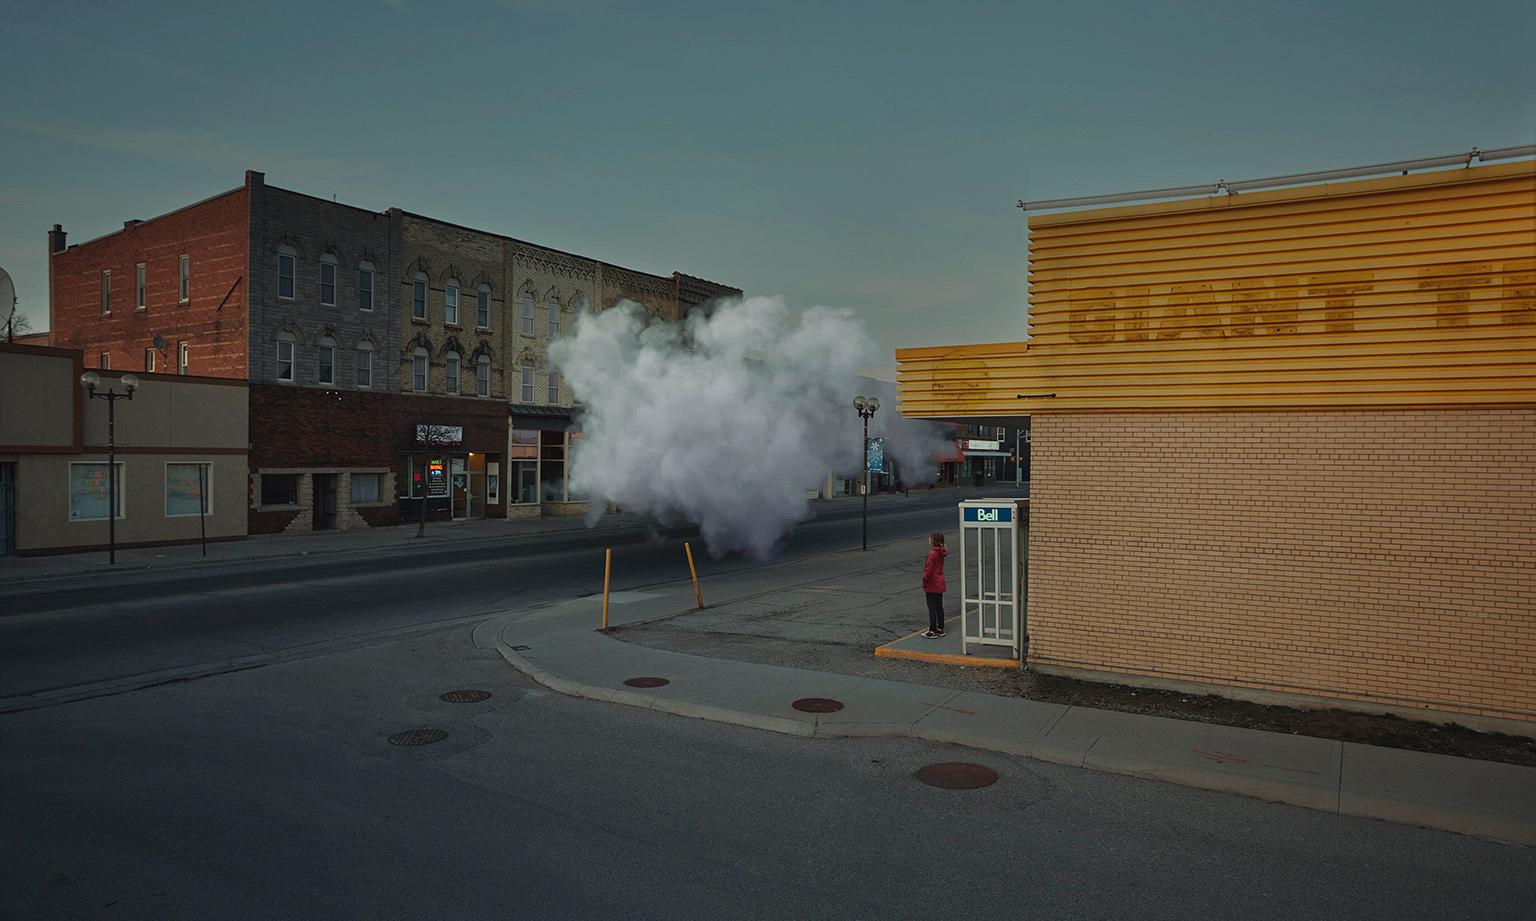 Mystery Cloud, Ontario, Canada, 2018. Dye Pigment Print.. Edition of 10.
Signed, Dated and Numbered on the Reverse.

Tyler Gray’s photographs are cinematic in their storytelling. They are those moments that transform and become completely surreal in